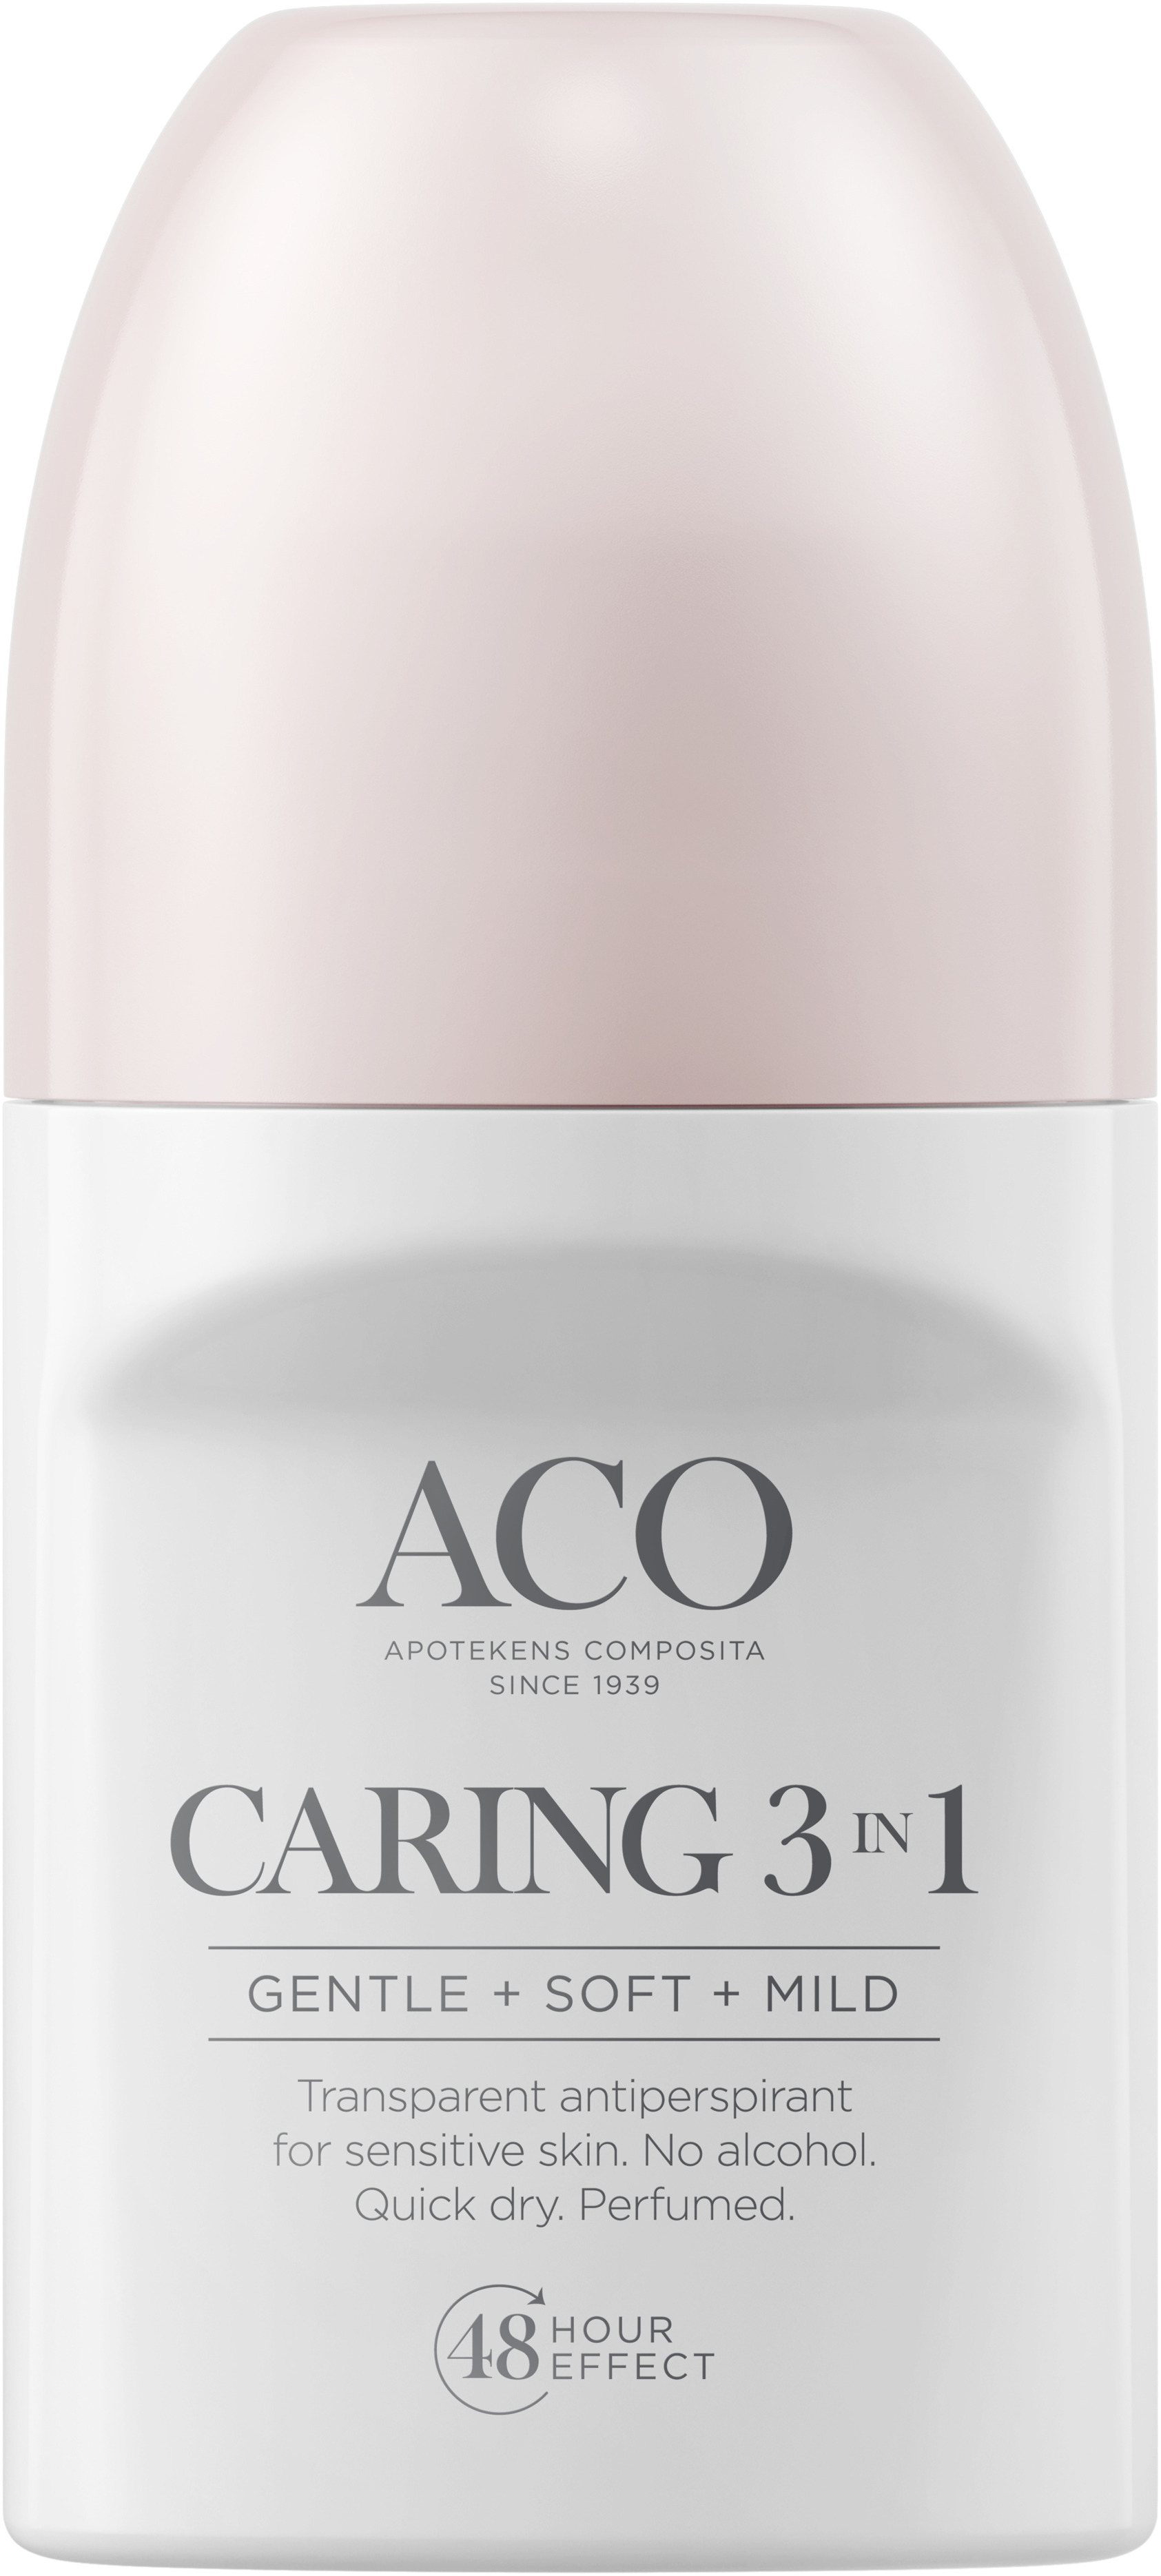 ACO Deo Caring 3in1 Parf 50ml